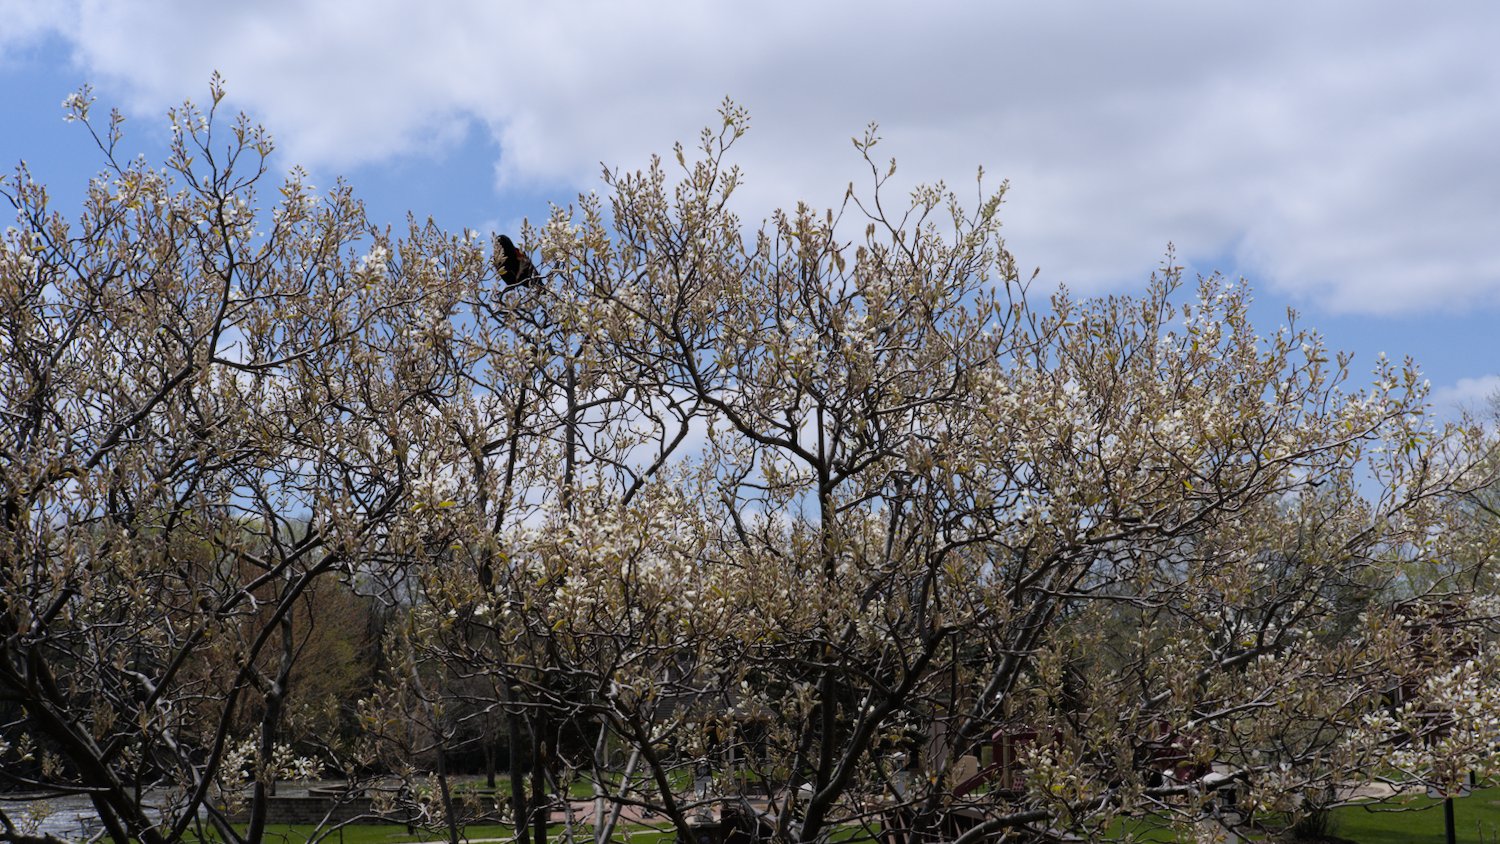 Red-winged blackbird in a tree.